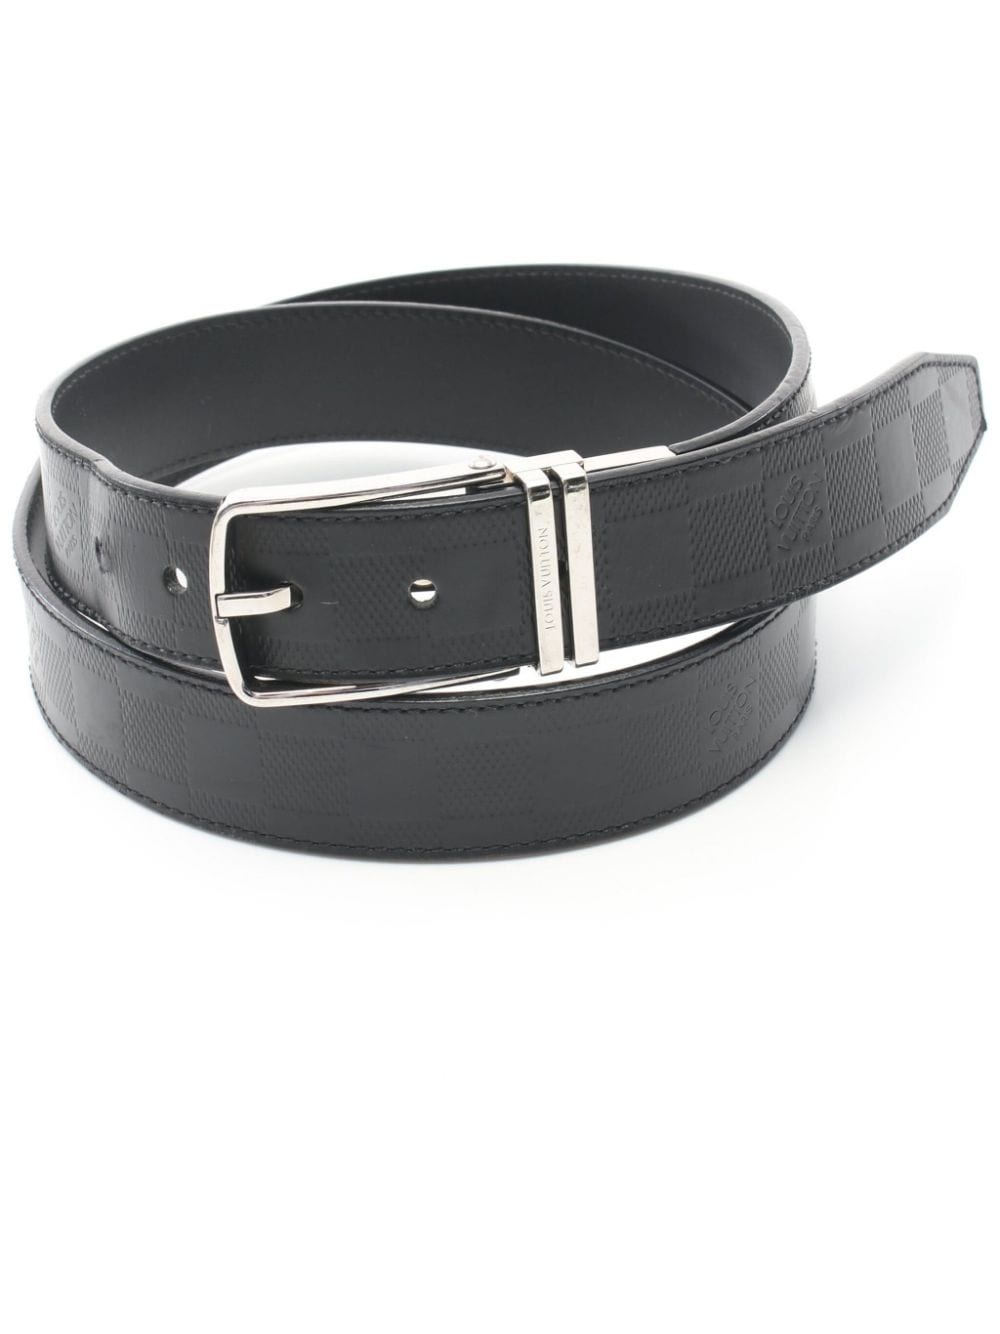 Louis Vuitton Pre-Owned 2015 Damier Infini leather belt - Nero